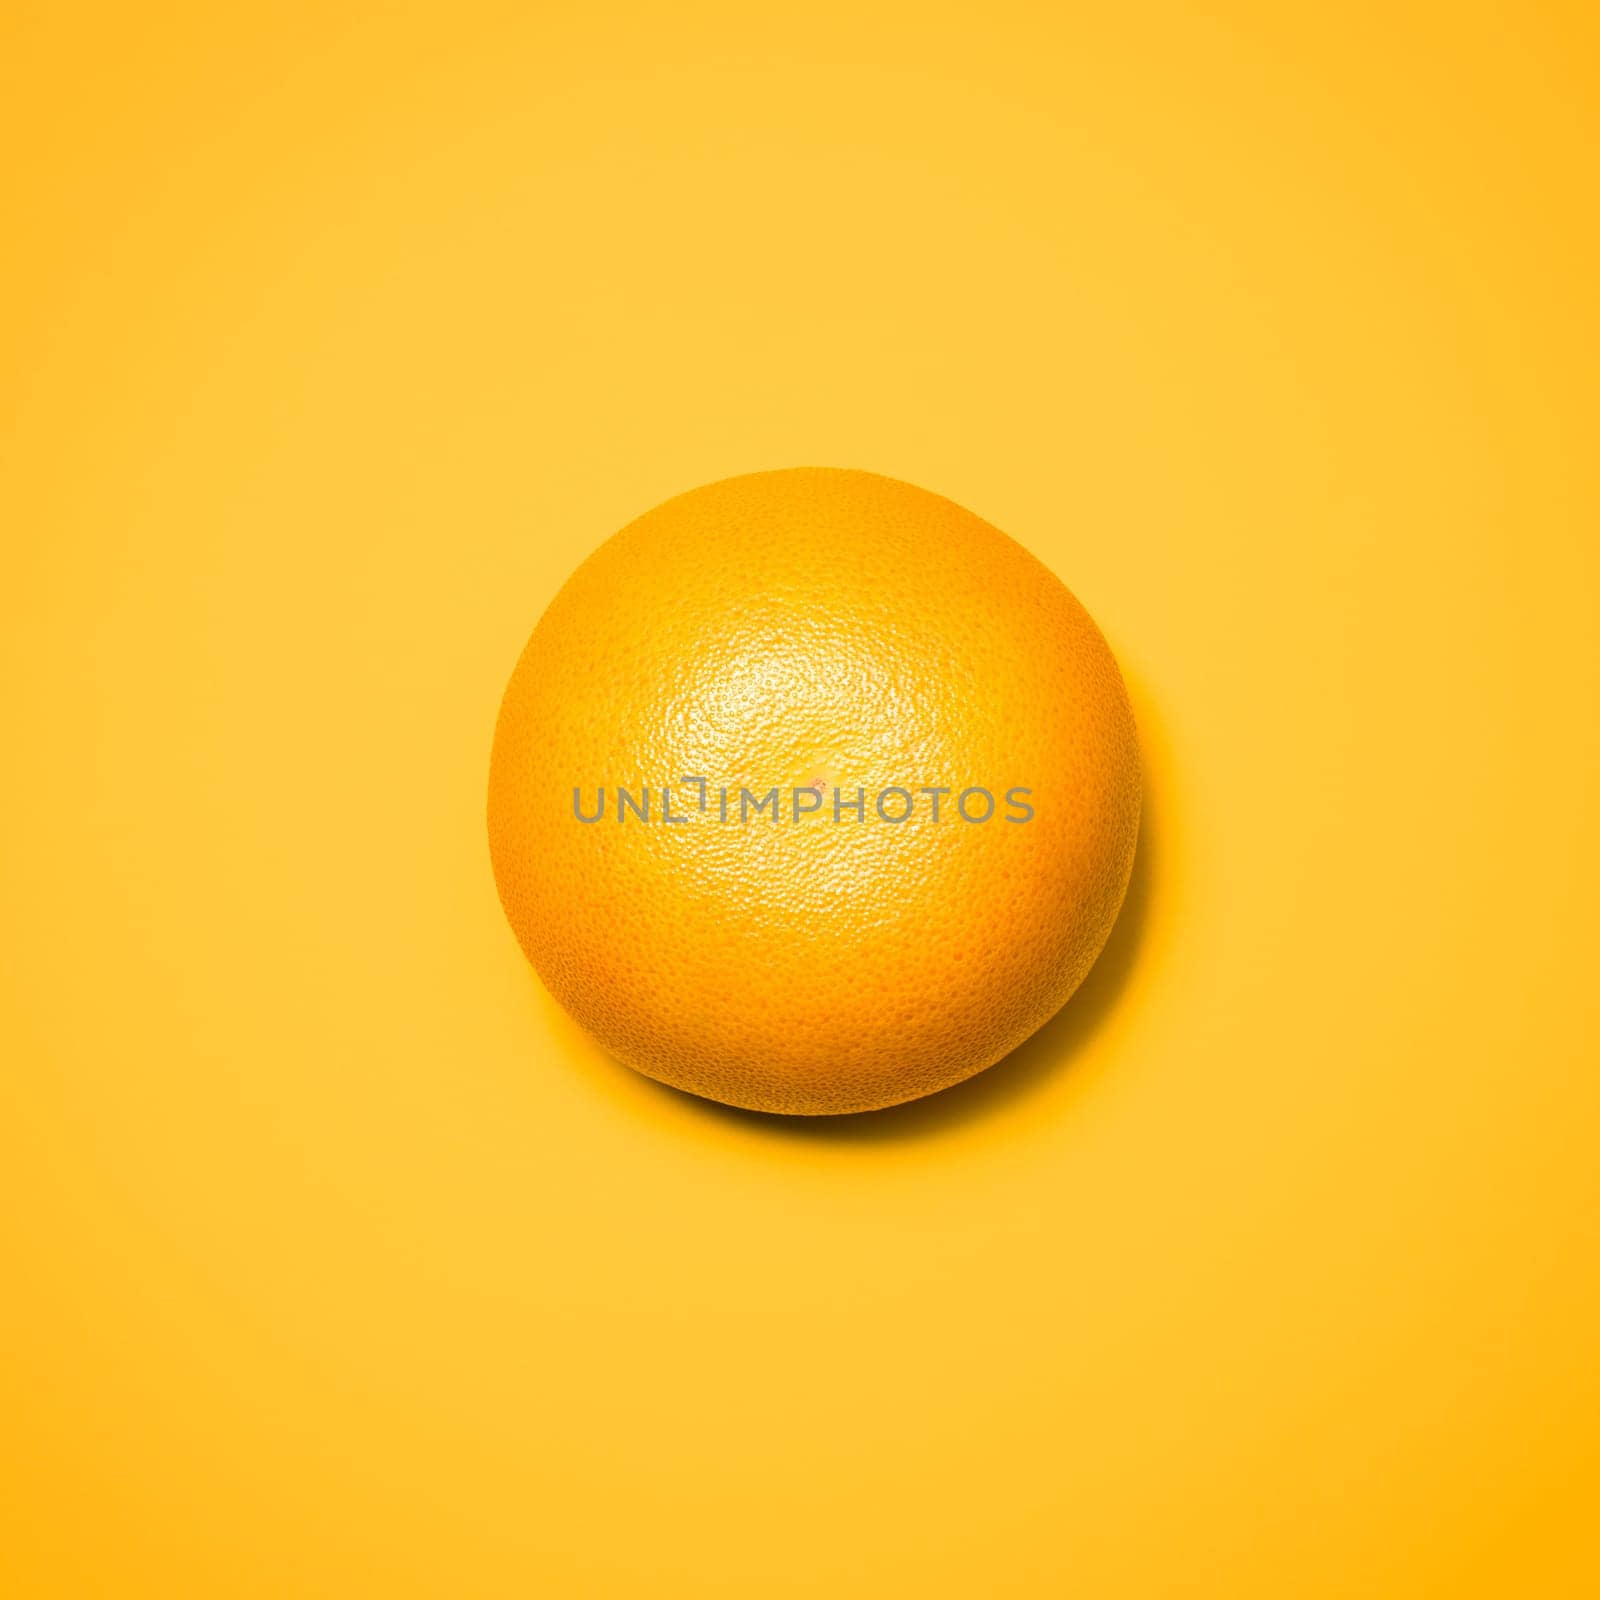 Studio, orange and fruit for diet, vitamin C and healthy nutrition on isolated wallpaper or background. Food, eating organic and grocery for natural wellness, health and fruity citrus mockup.